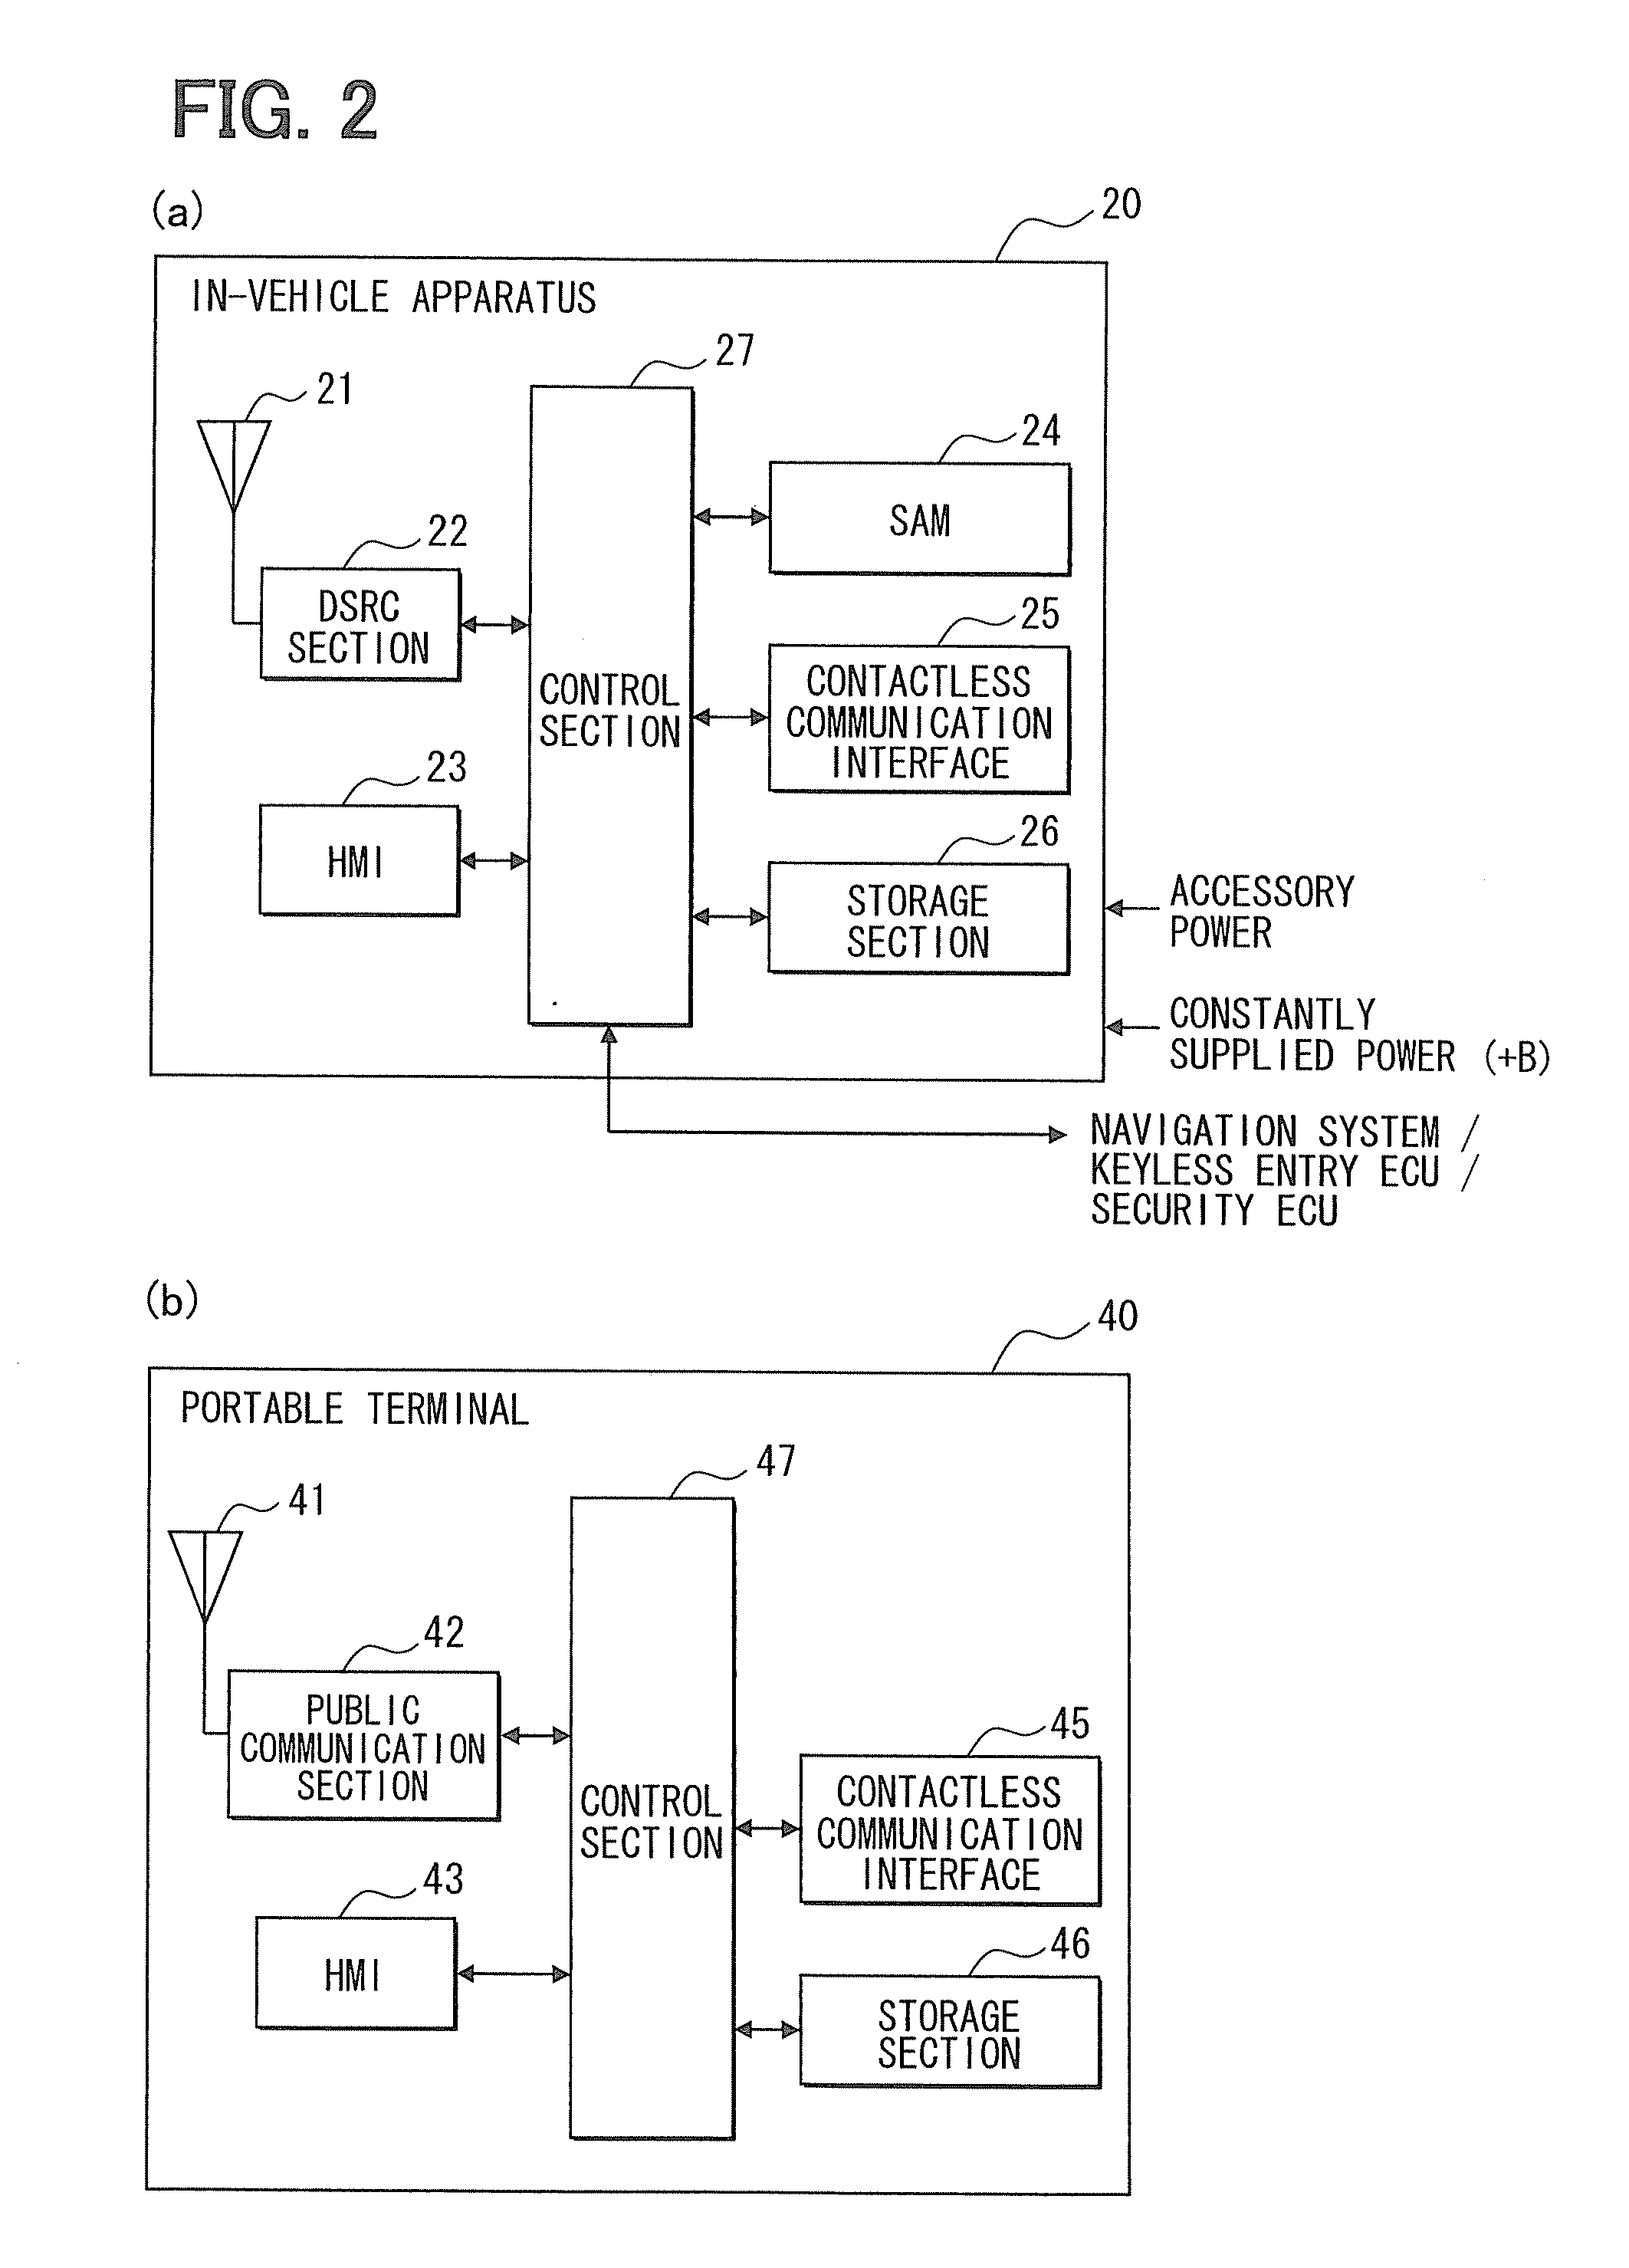 In-vehicle apparatus and semiconductor device